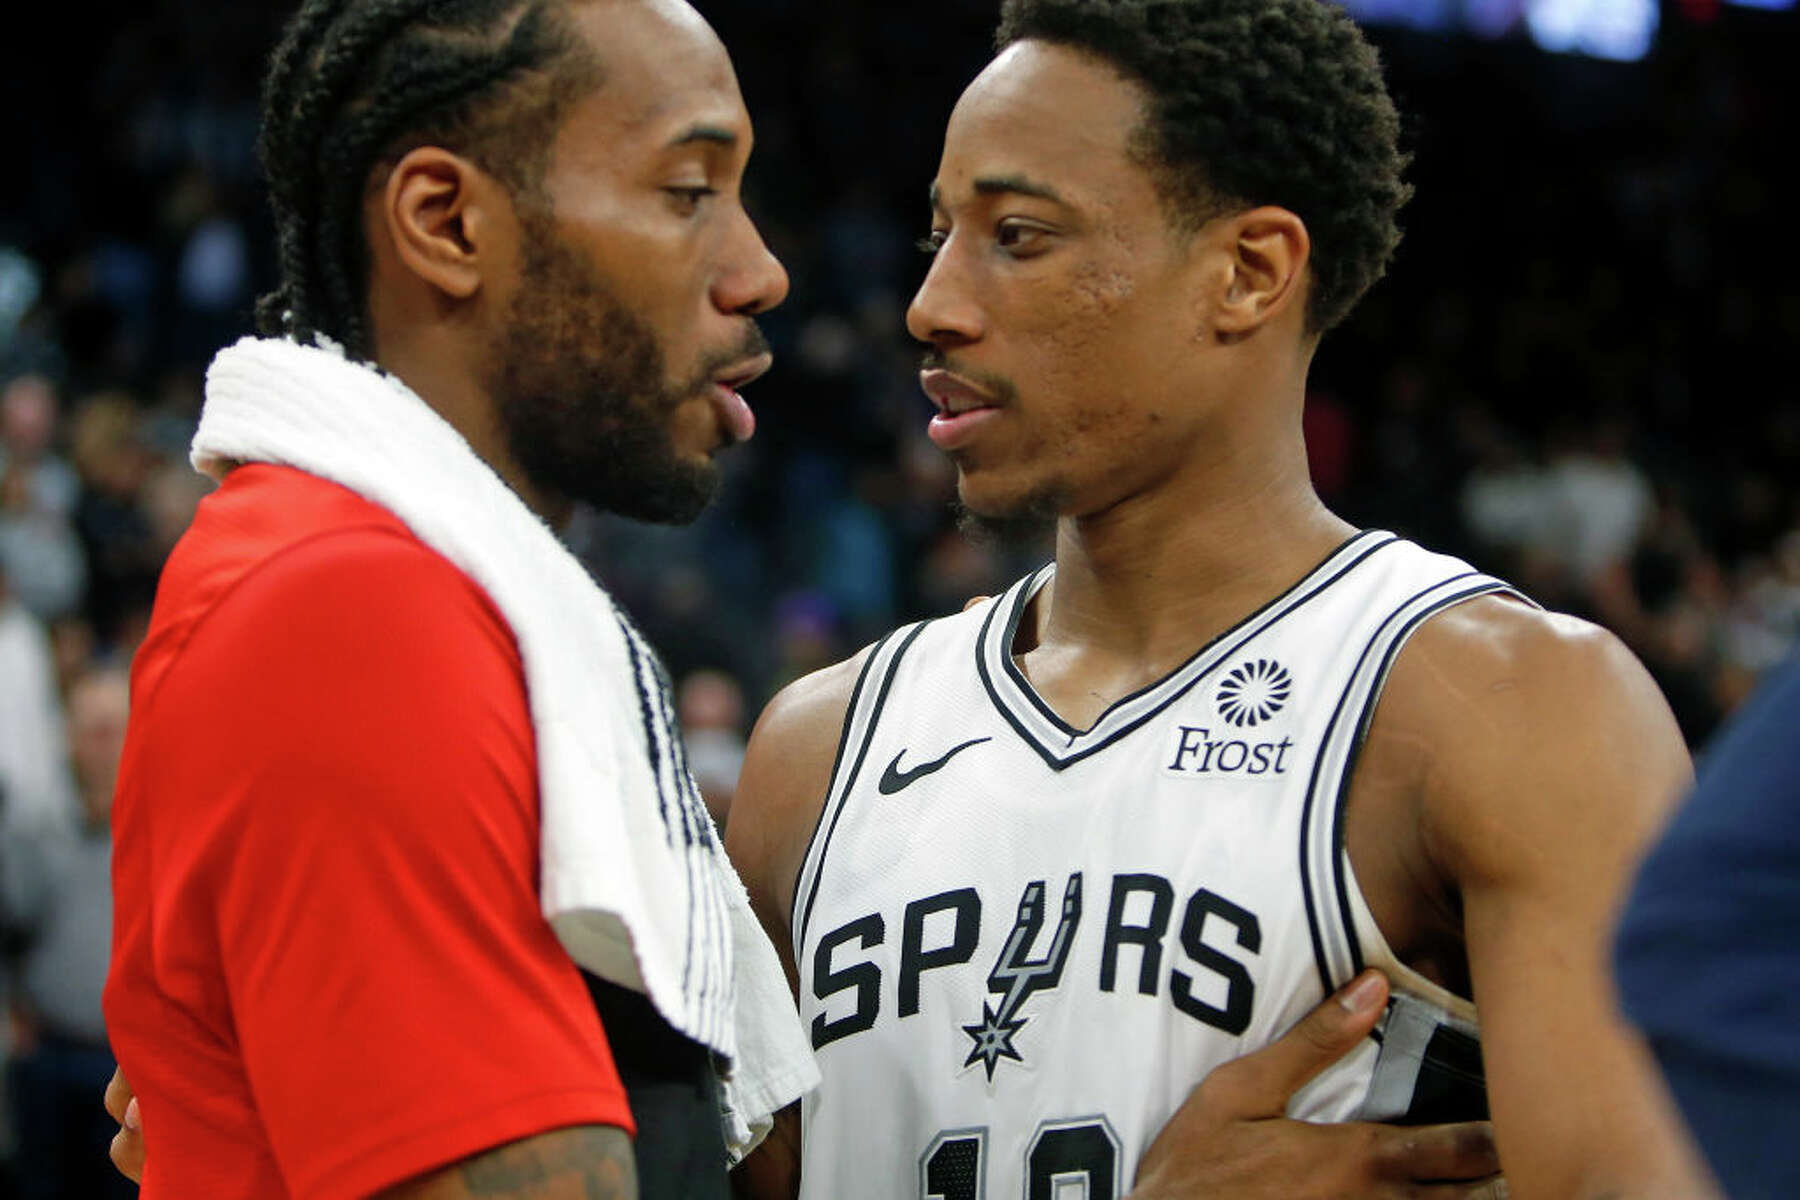 San Antonio Spurs Fiesta 5: Dejounte Murray Trade Rumors Flying - Sports  Illustrated Inside The Spurs, Analysis and More